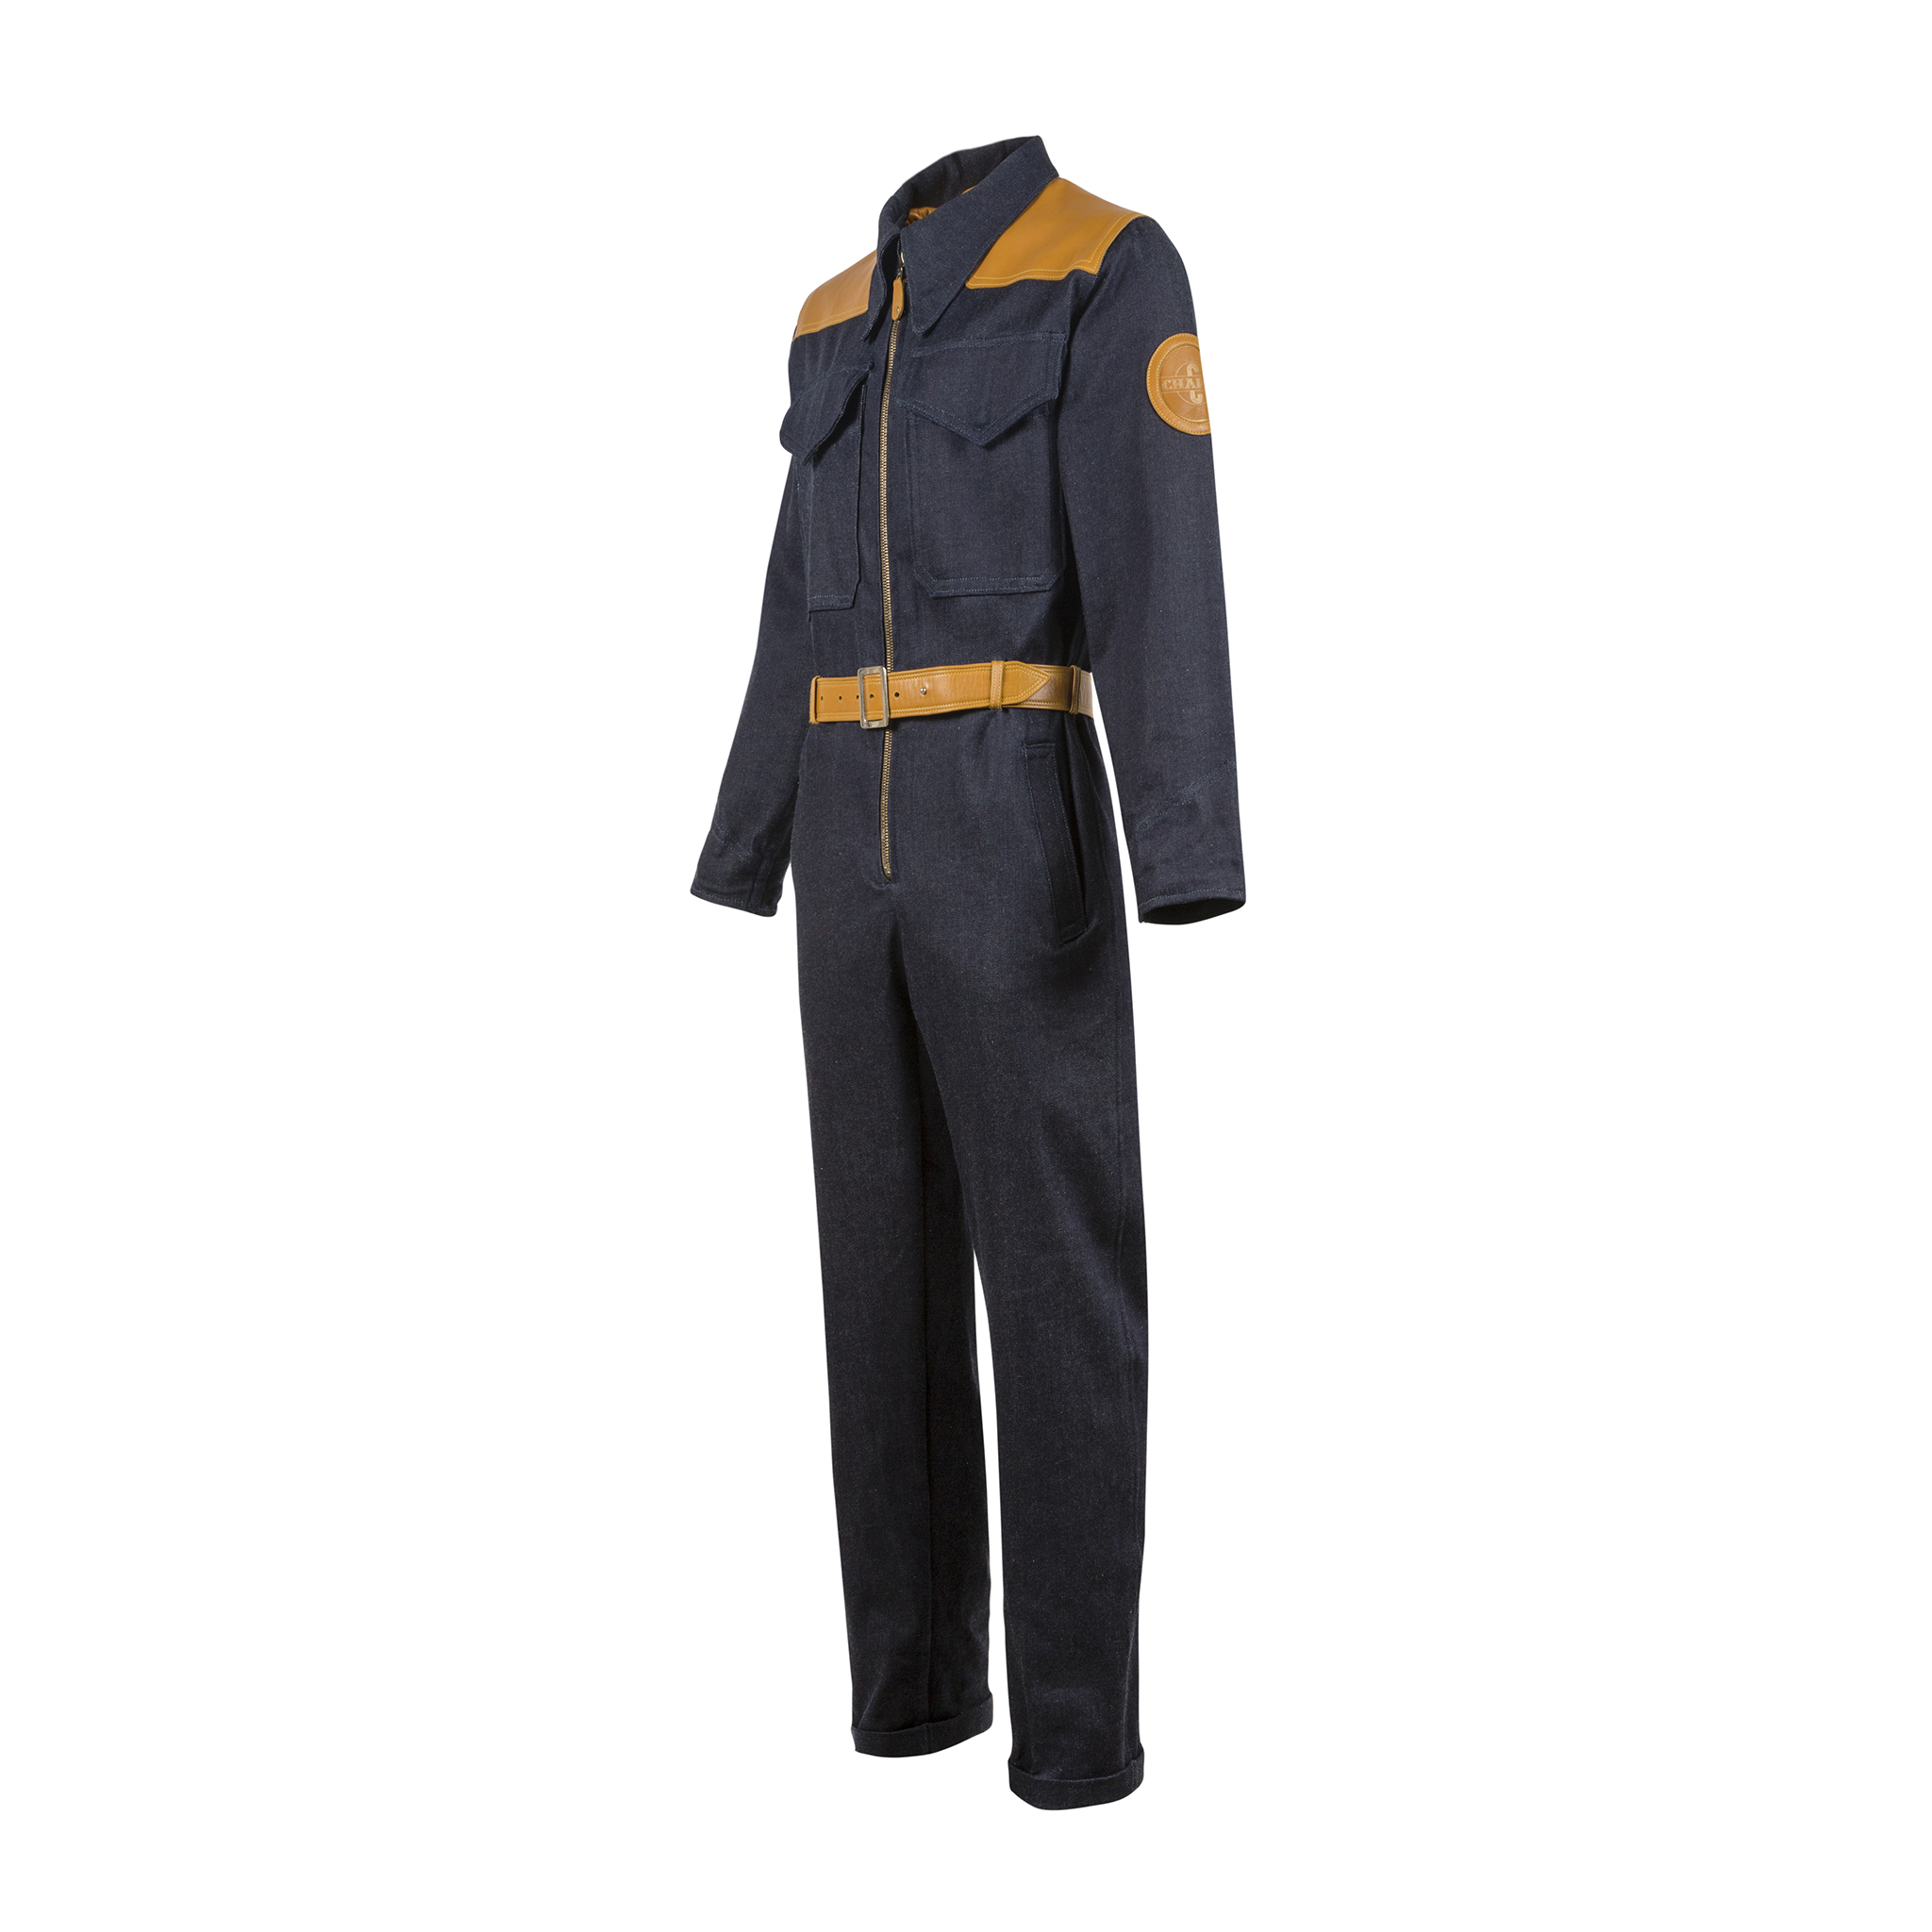 1950 Overall - Denim canvas and glossy leather - Yellow color